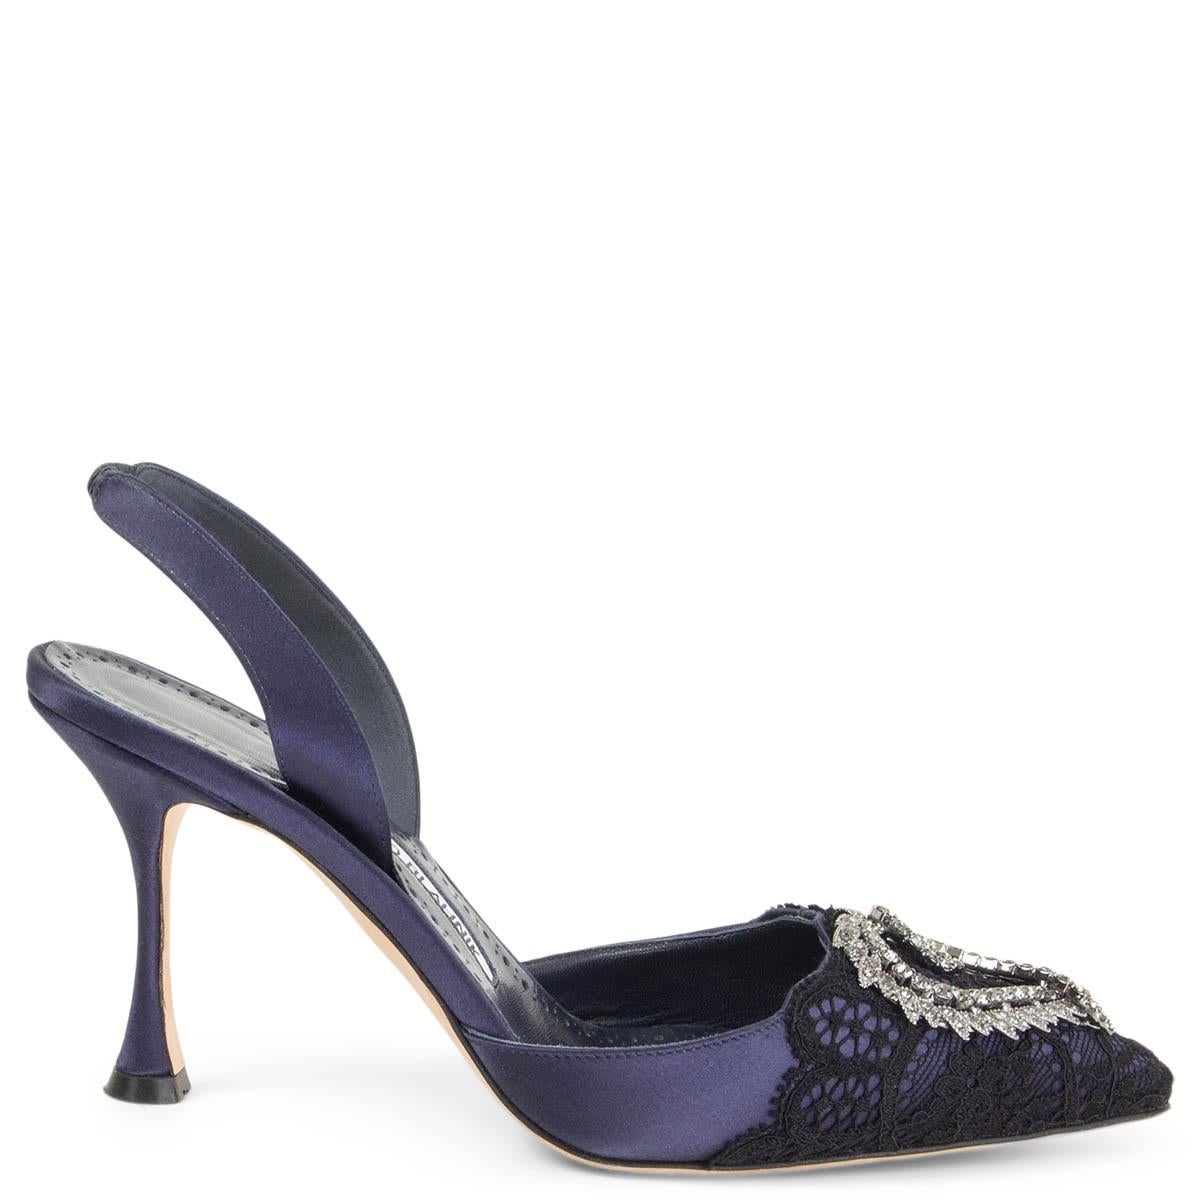 100% authentic Manolo Blahnik Antiphona 90 crystal heart embellished slingbacks in navy satin and a black lace cap. Have been worn and are in excellent condition. 

Measurements
Imprinted Size	37.5
Shoe Size	37.5
Inside Sole	25cm (9.8in)
Width	7.5cm